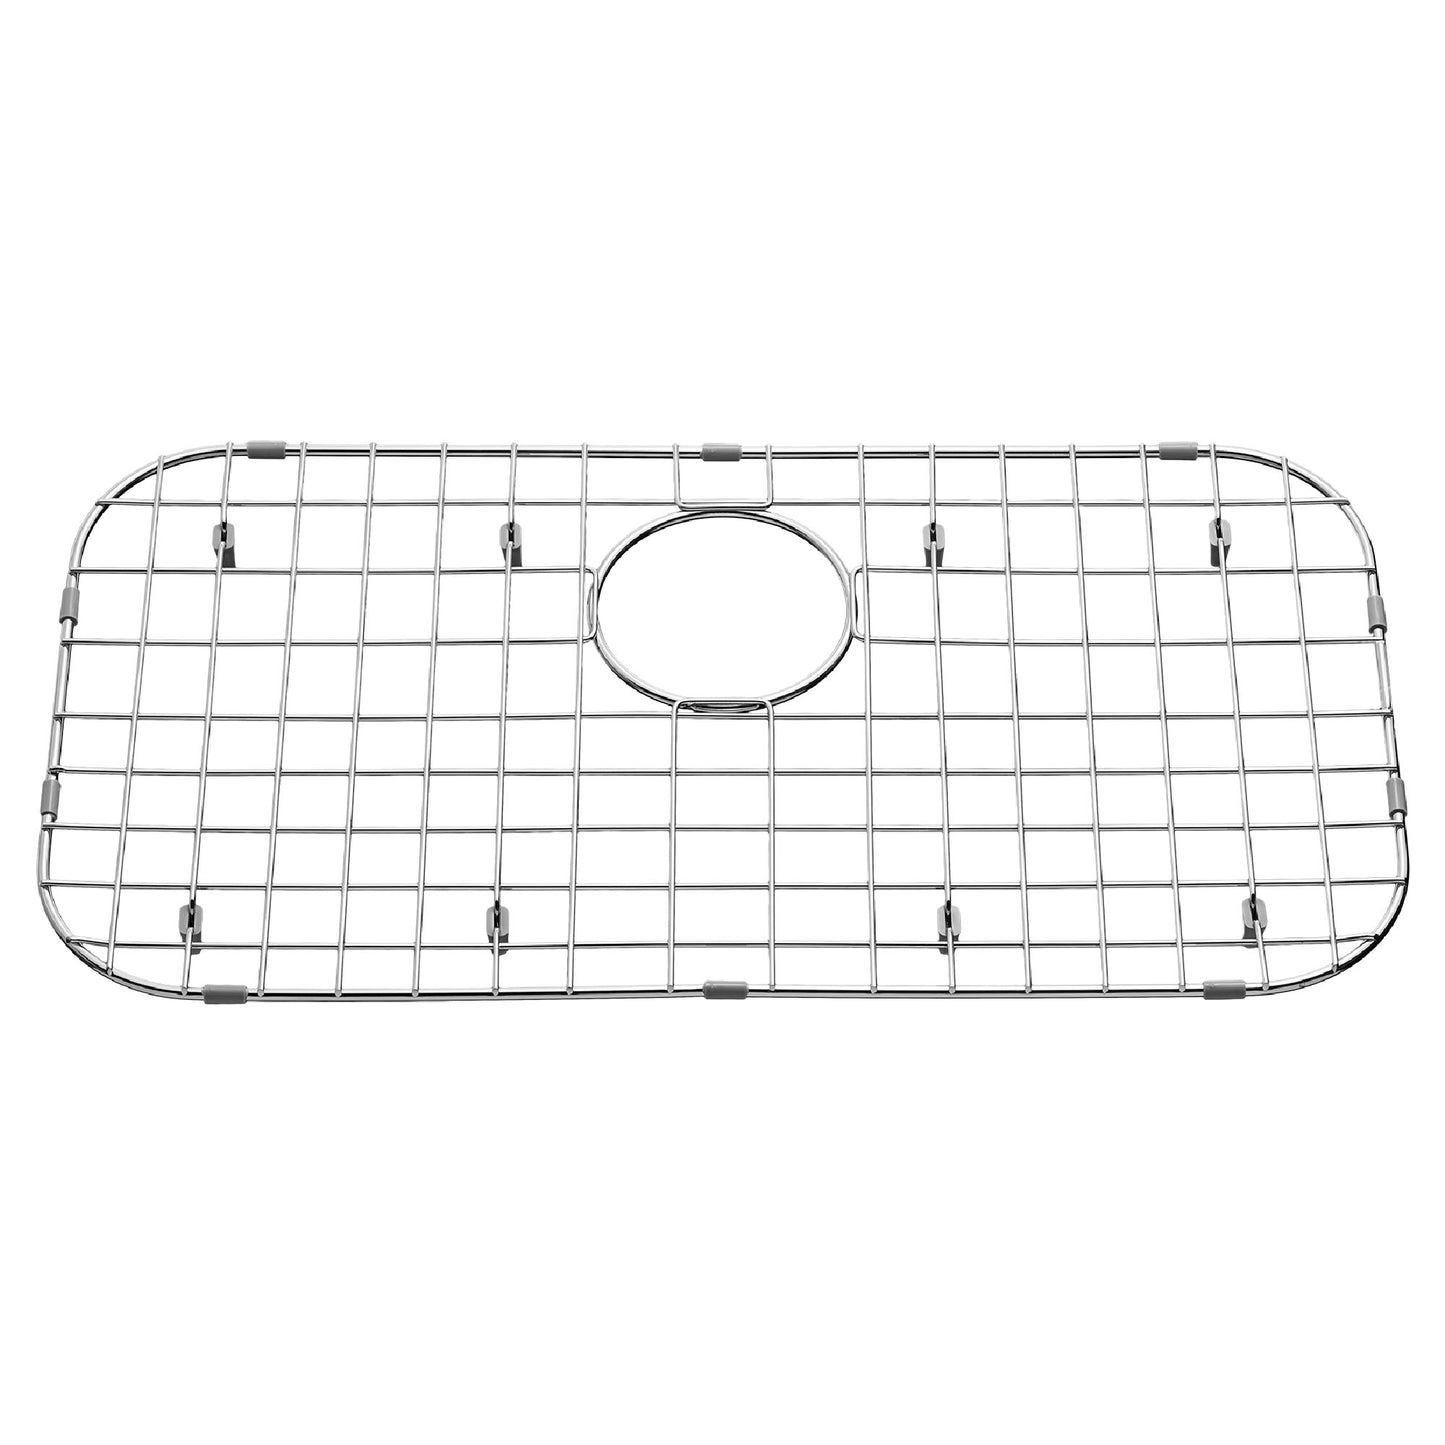 AMERICAN-STANDARD 8459.301800.075, Portsmouth Bottom Sink Grid 30 x 18-In. in Stainless Stl